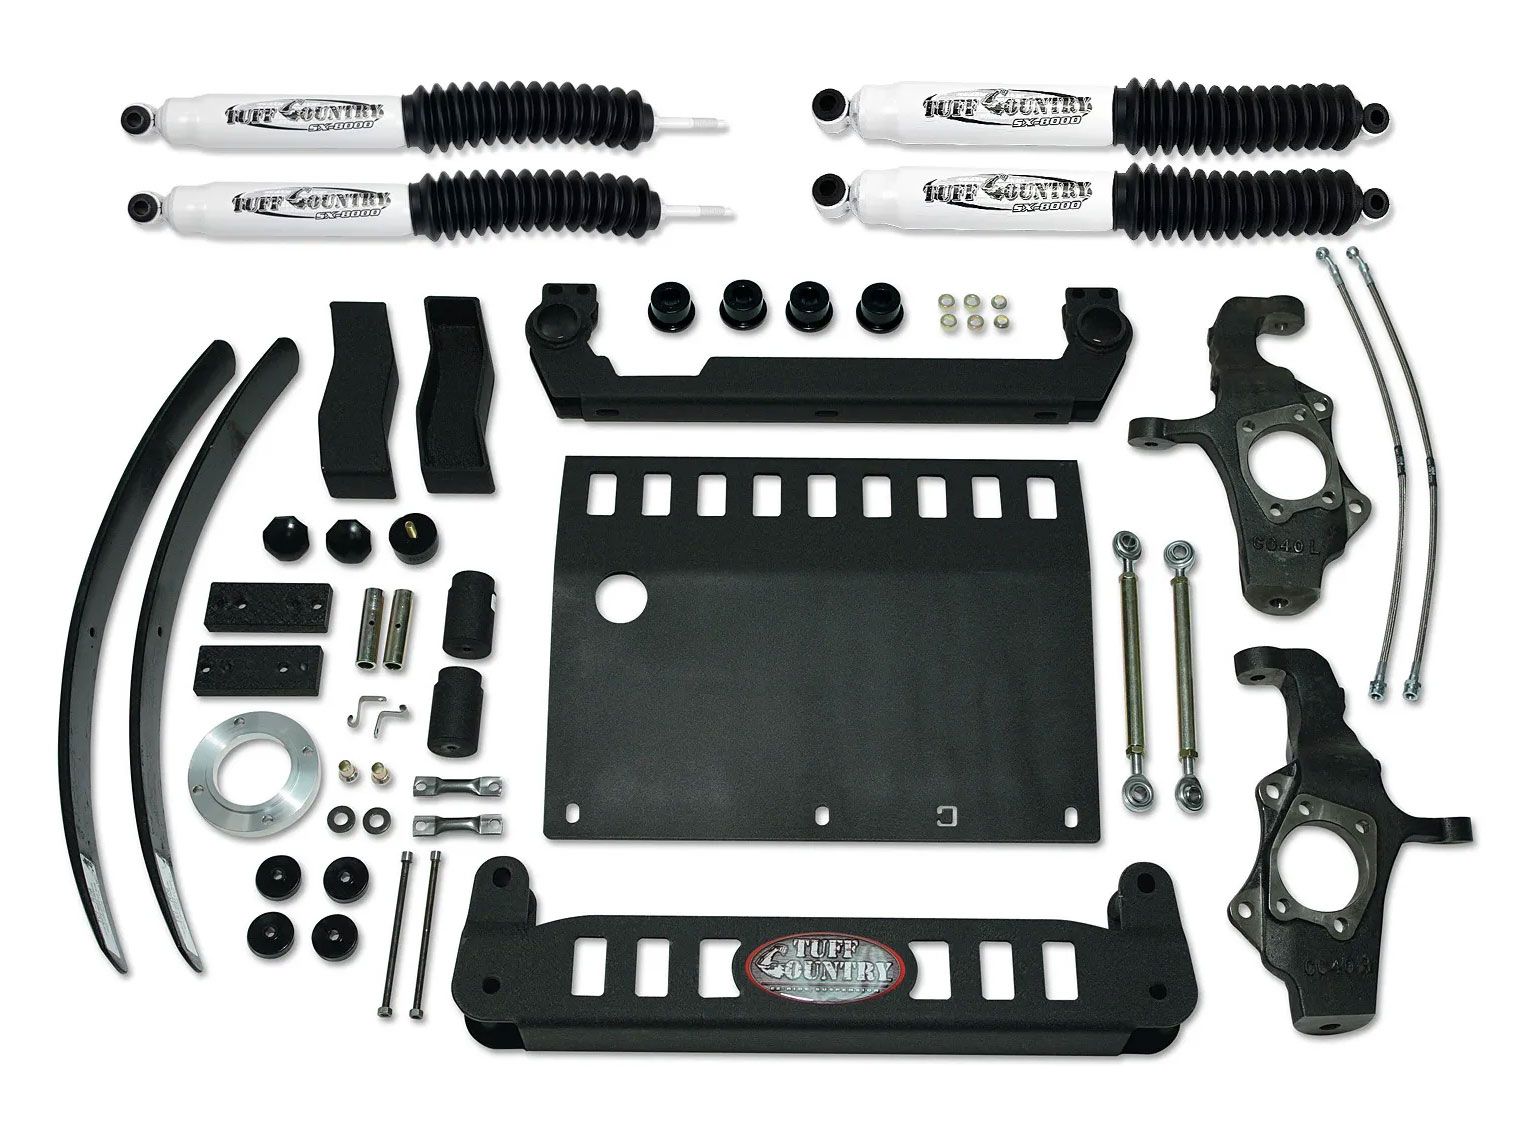 4" 2004-2012 Chevy Colorado 4wd Lift Kit by Tuff Country